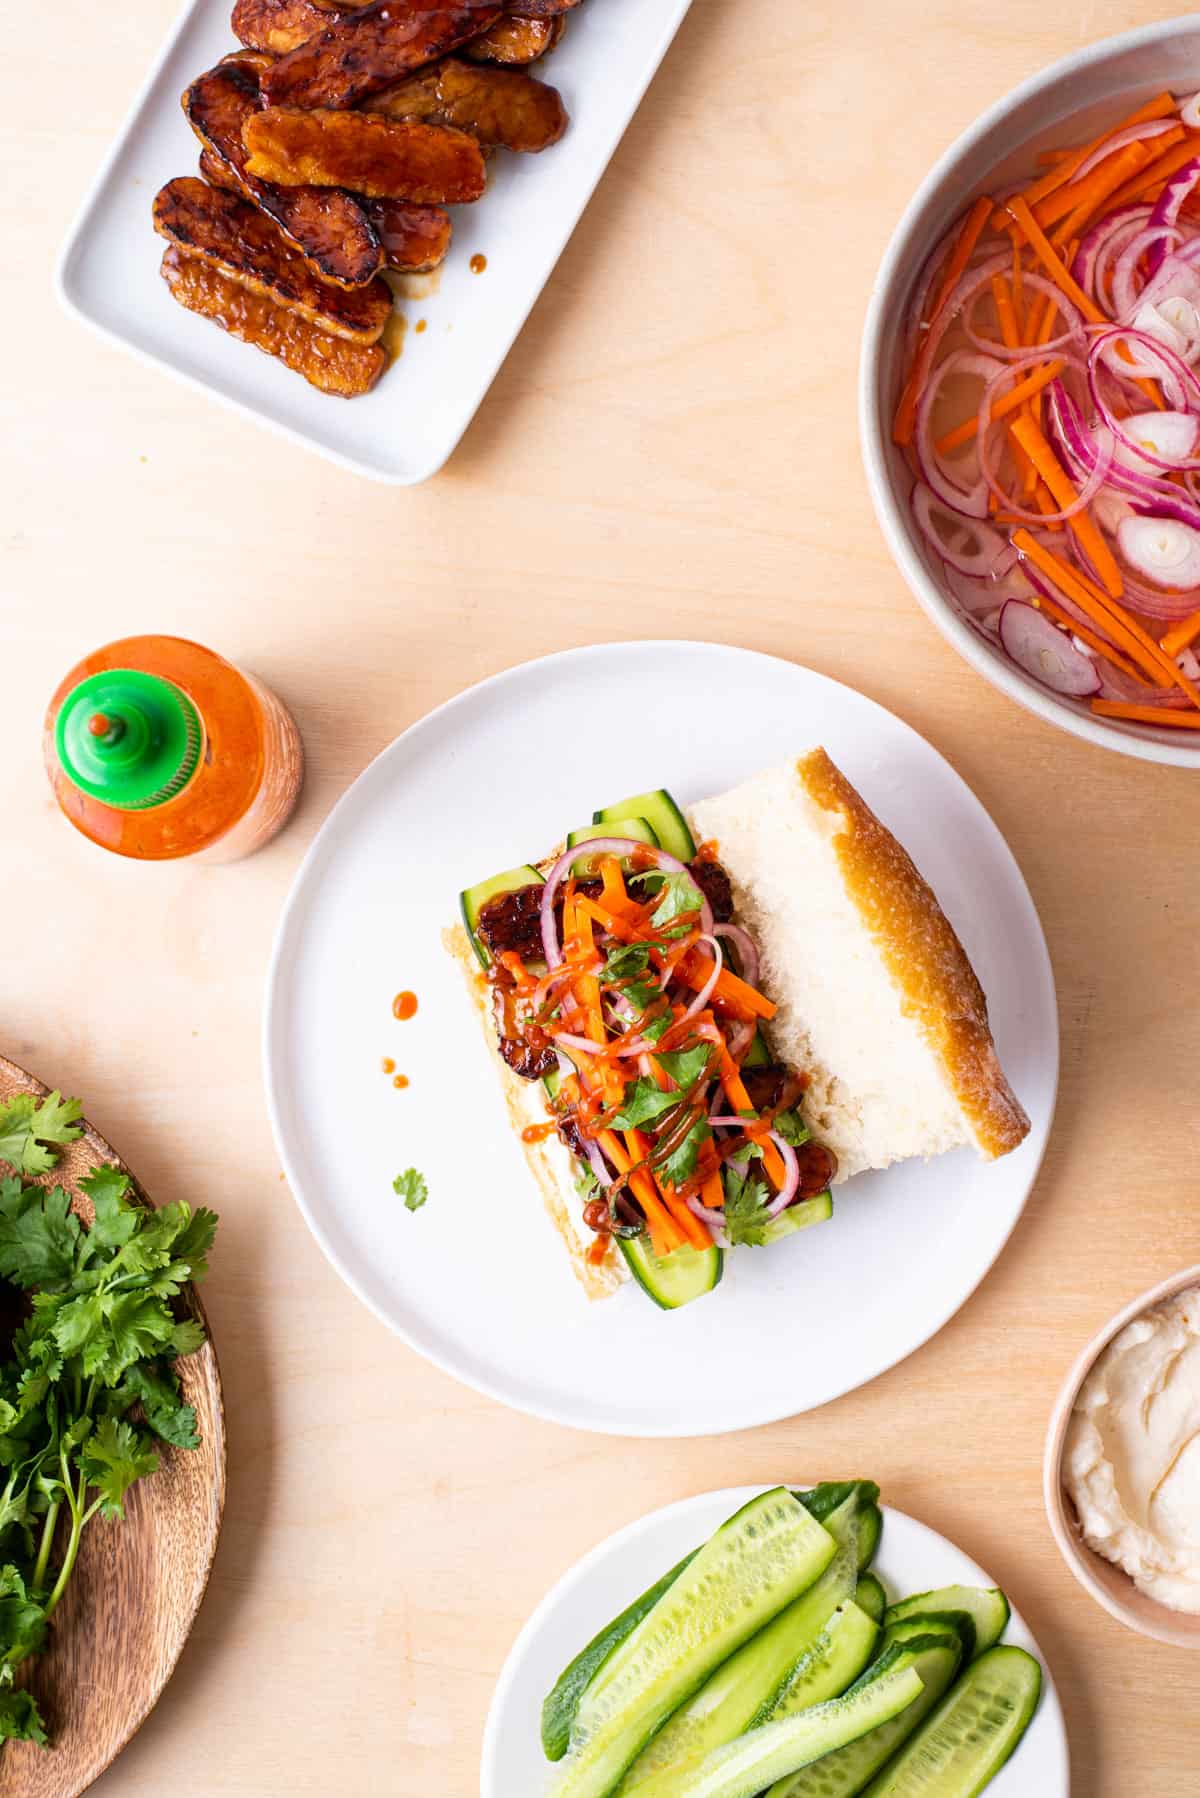 Assembling a tempeh banh mi sandwich: glazed tempeh, pickled vegetables, cucumbers, and cilantro, laid out on a wooden table.